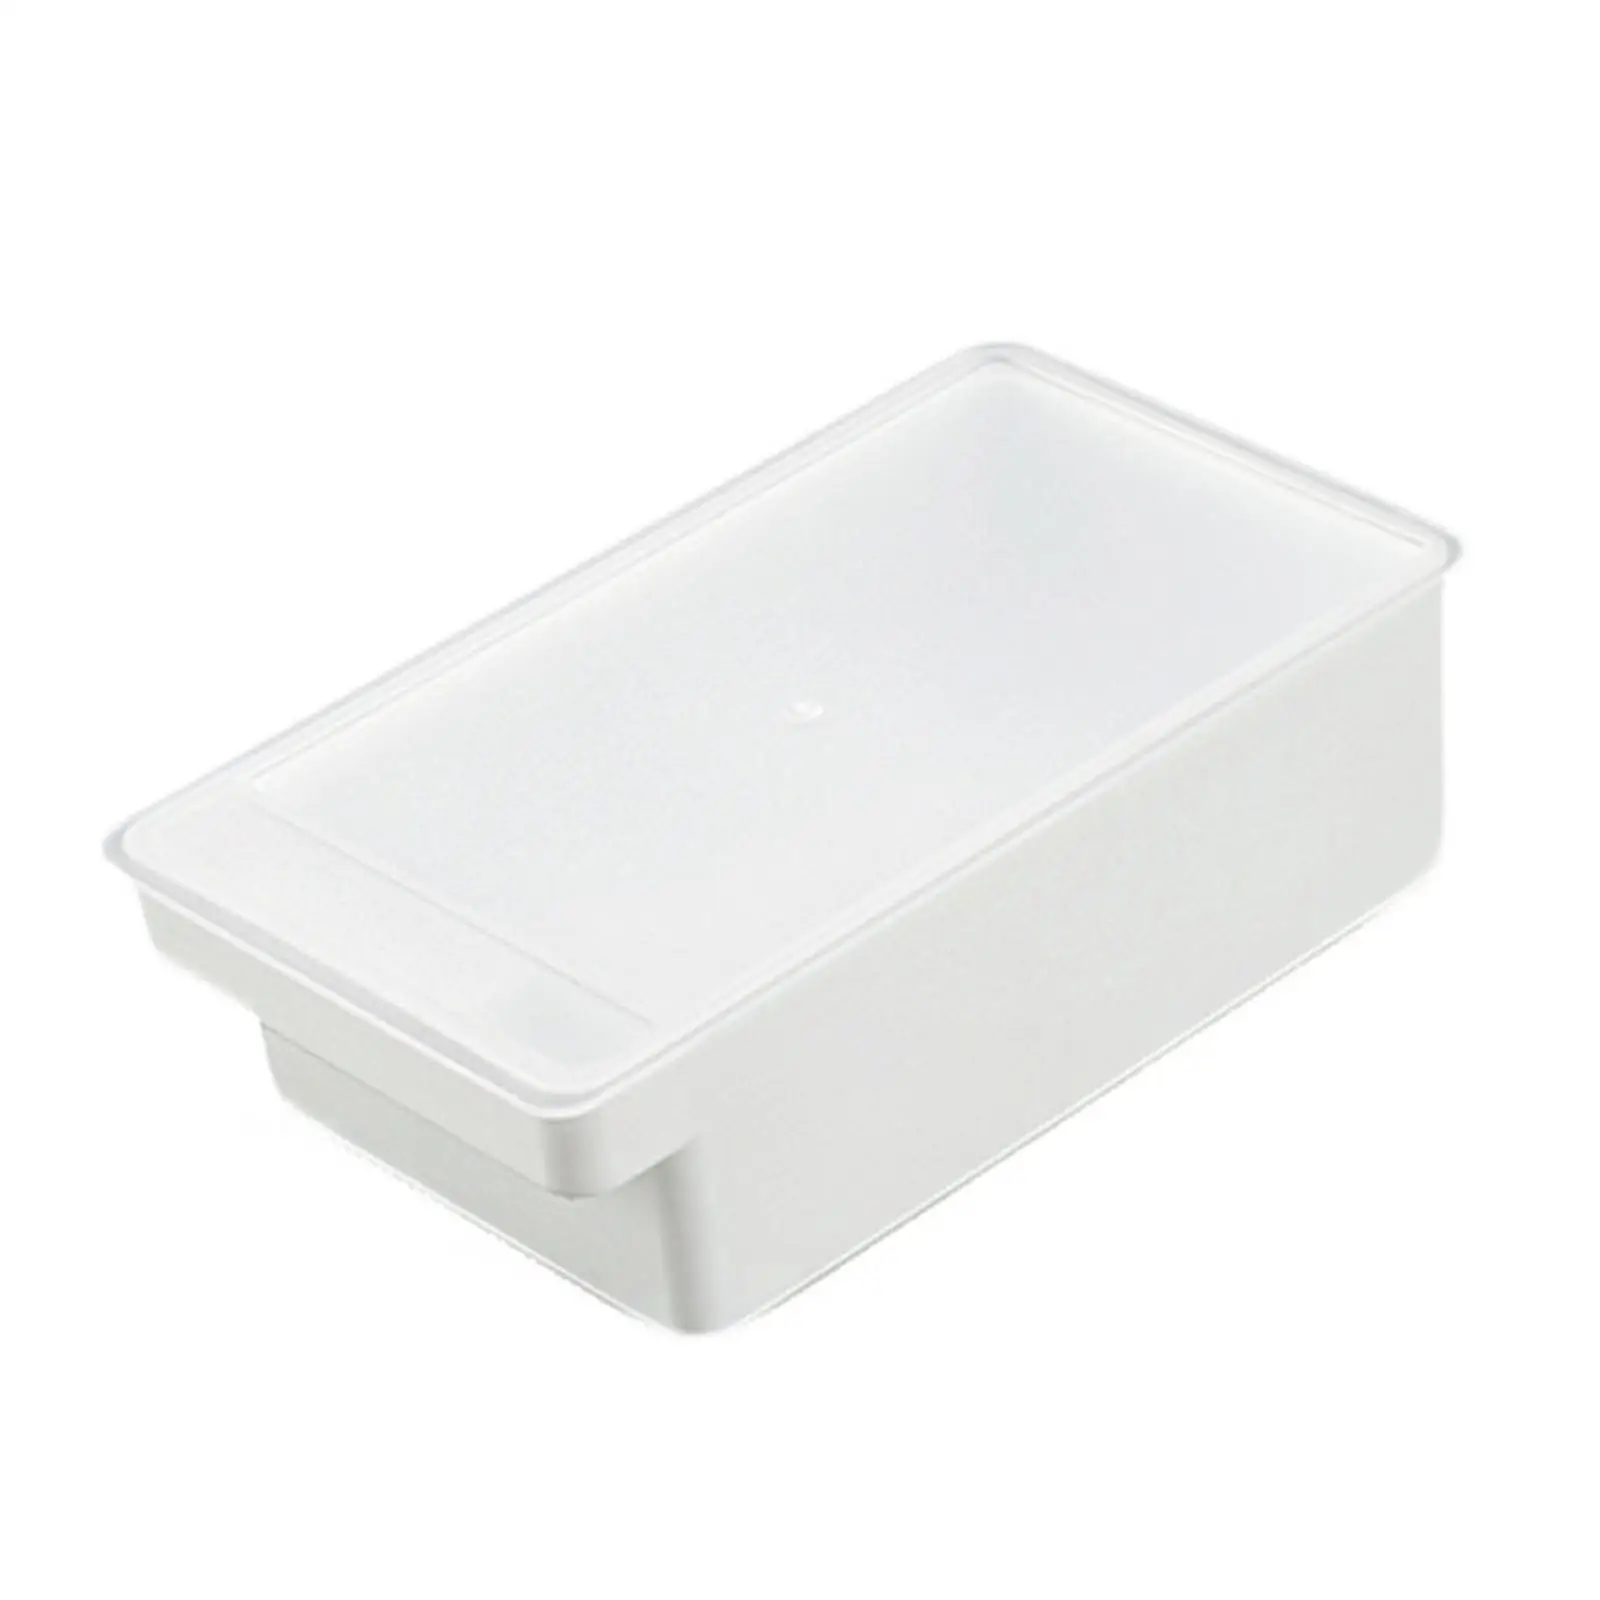 Butter Cutting Storage Box Butter Keeper with Cover White for Refrigerator